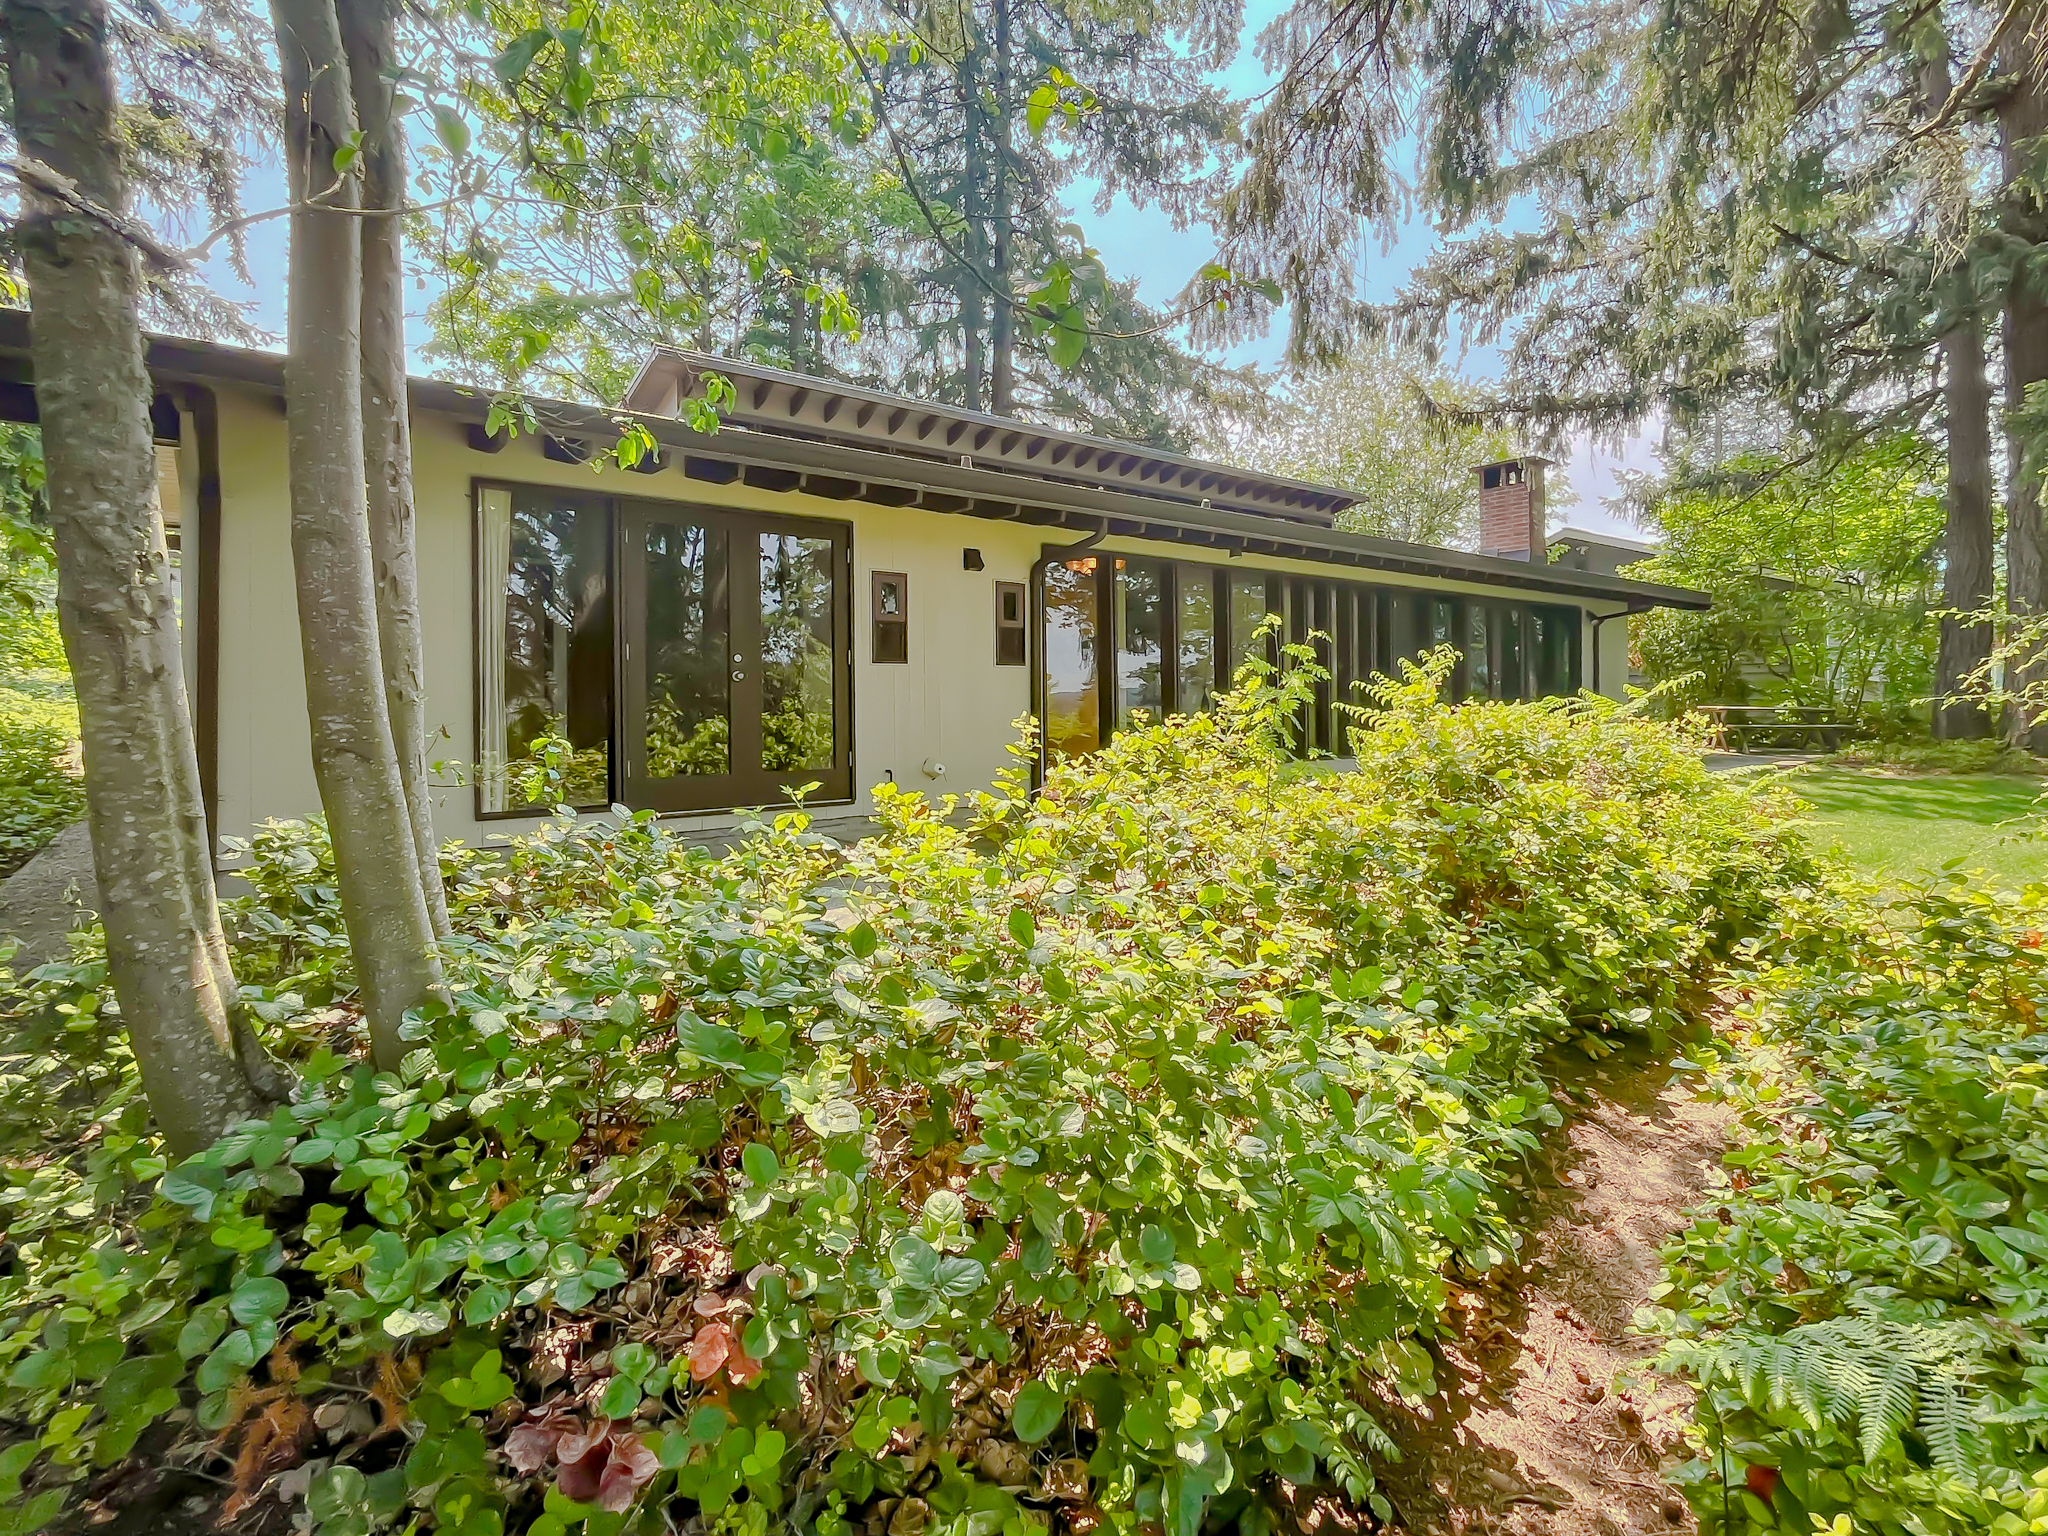 6344 NE 159th St, Kenmore, WA 98028 – Exquisite Mid-Century Home on the Inglewood Golf Club in Kenmore – $3,600/month